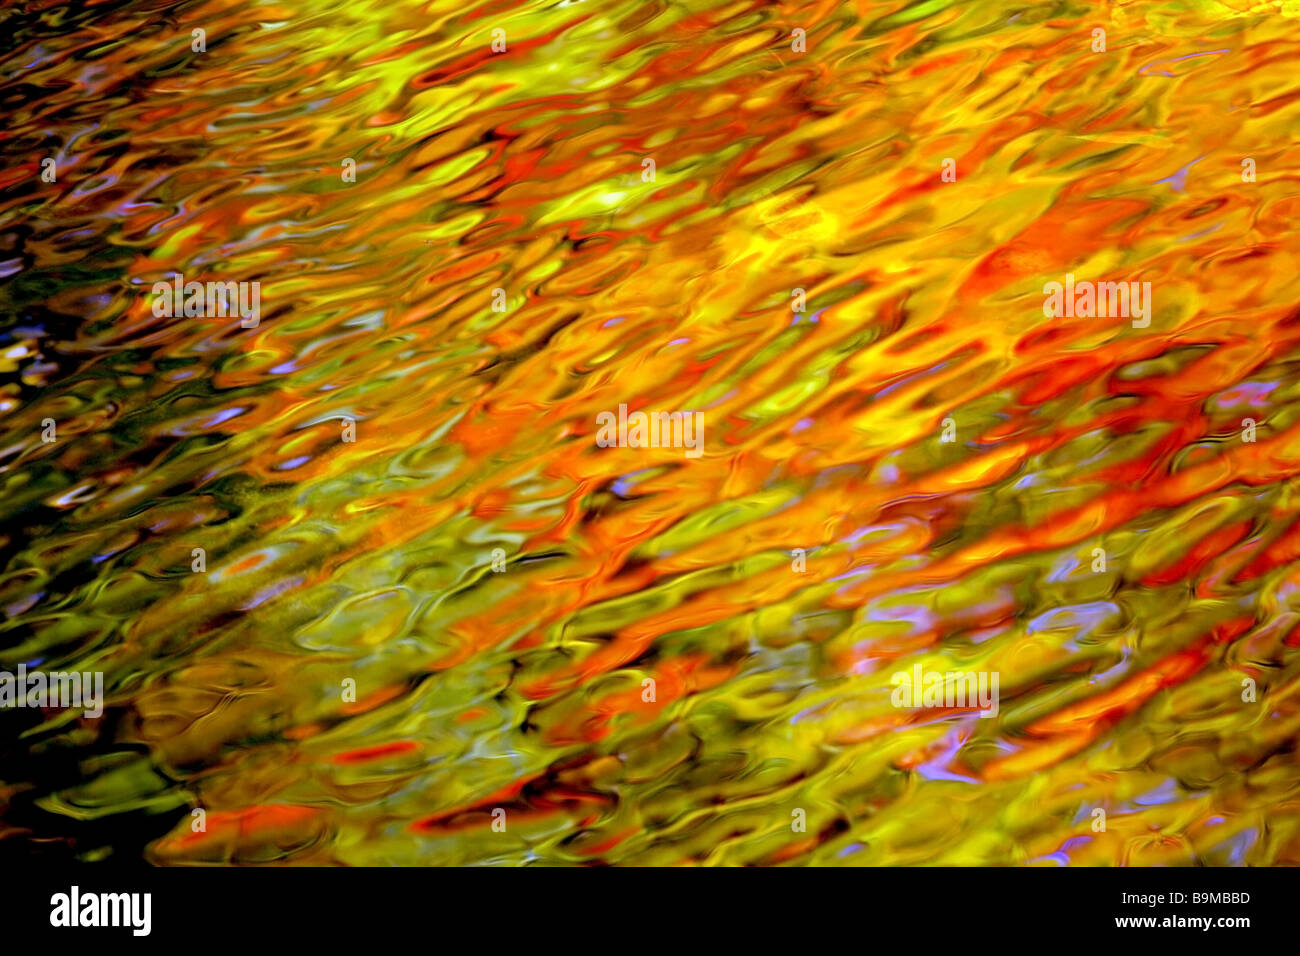 Reflection of Fall Colors in Water Stock Photo